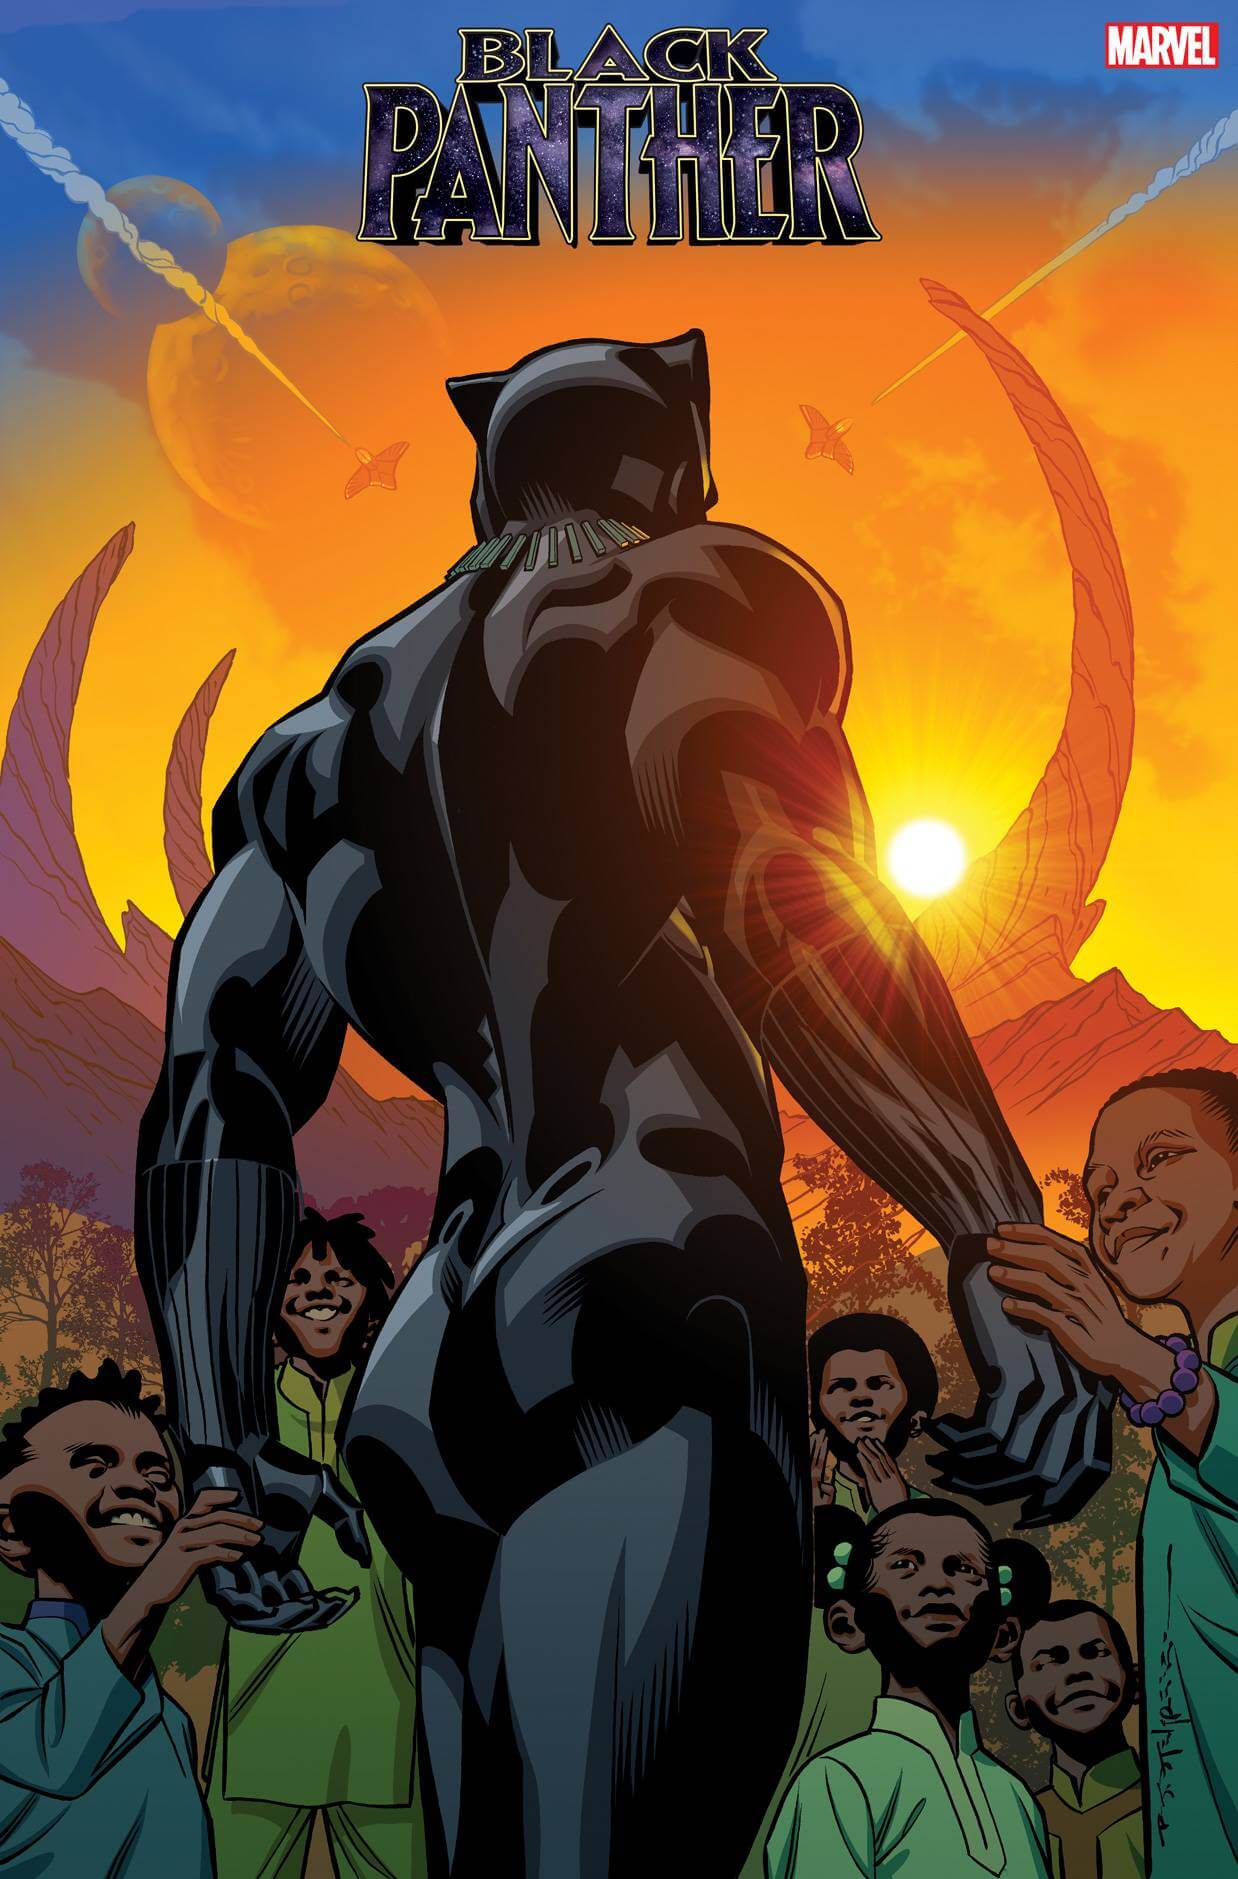 Black Panther #25 B Brian Stelfreeze Final Issue Variant (05/26/2021) Marvel